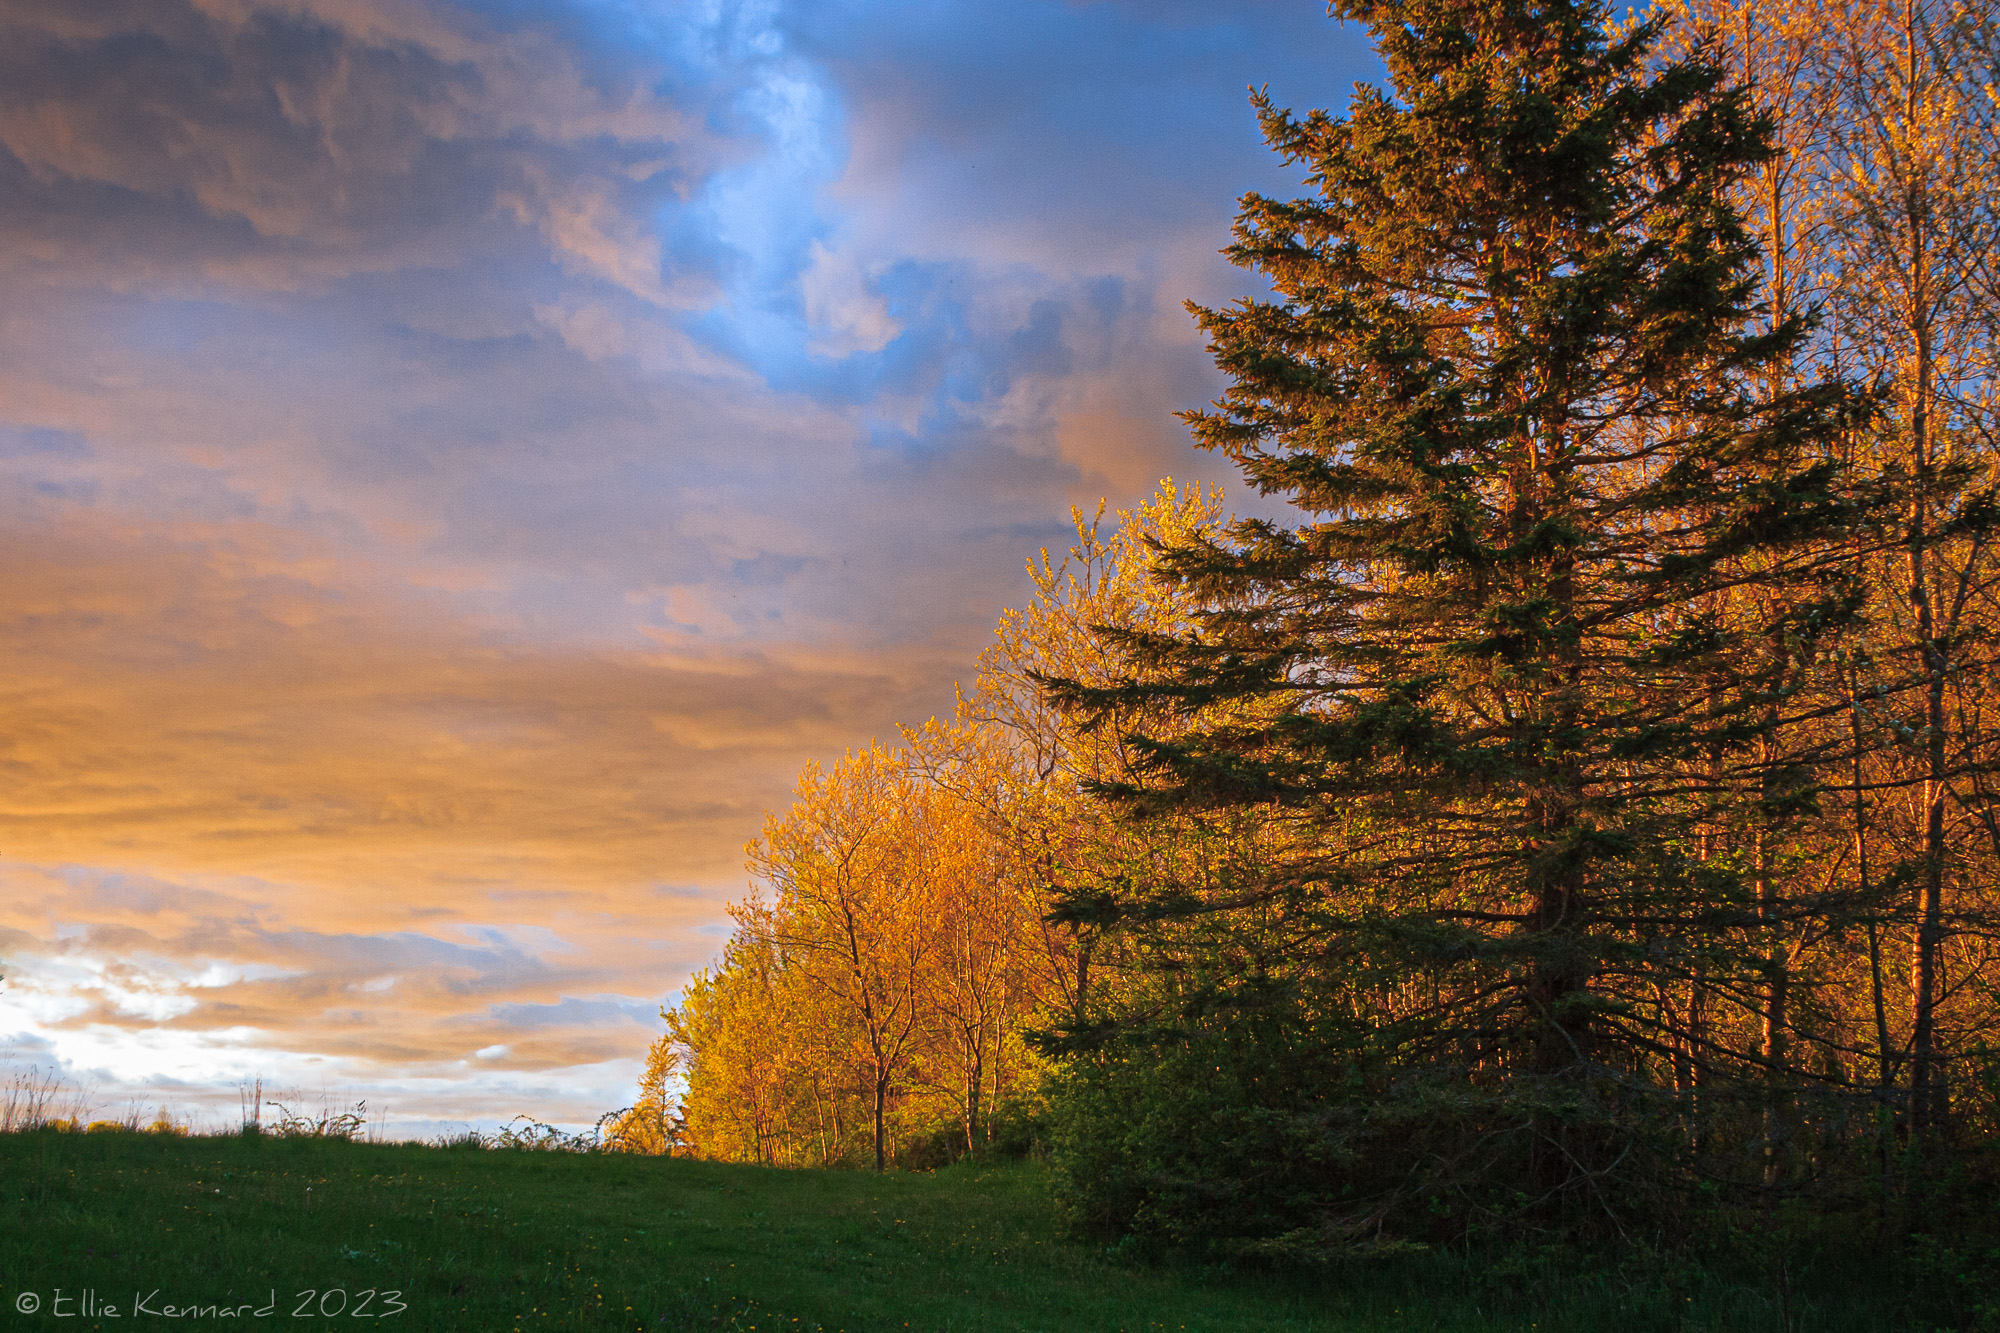 The left half of the photograph is mainly slightly orange tinted clouds and blue sky with some white clouds nearer the horizon. The middle to right is golden trees with young leaves stretching into the distance. In the foreground is a tall, dark evergreen tree.